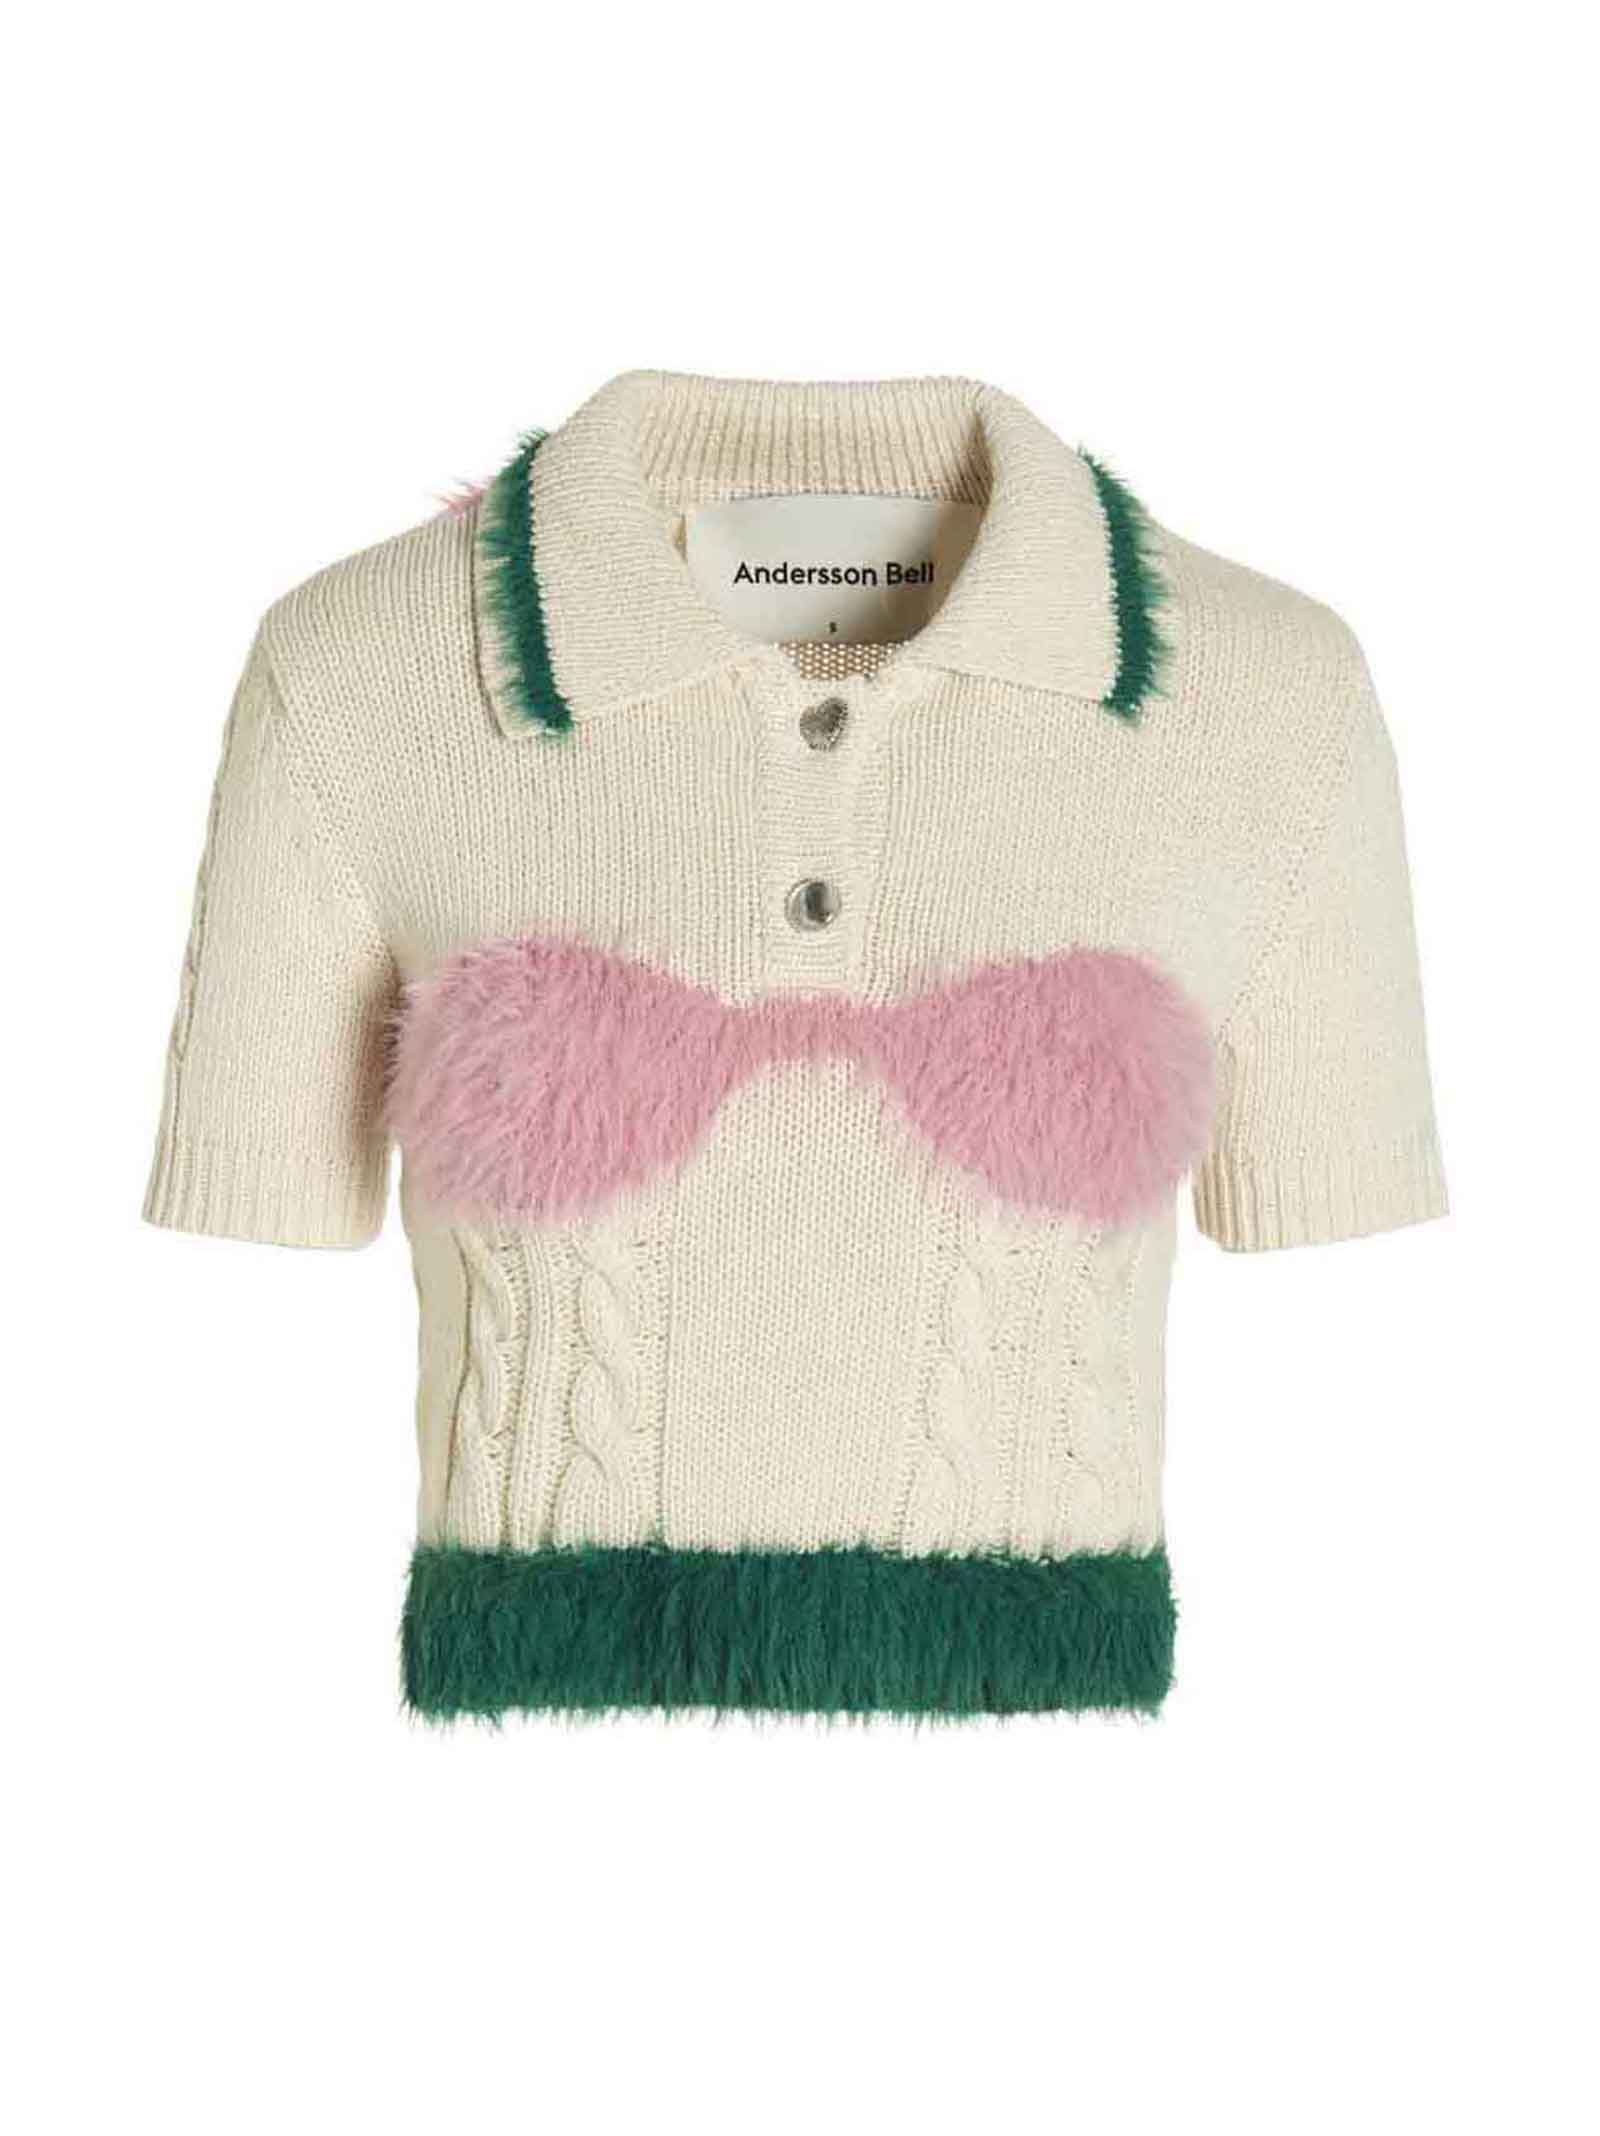 ANDERSSON BELL HAYES LINGERIE INTARSIA SWEATER